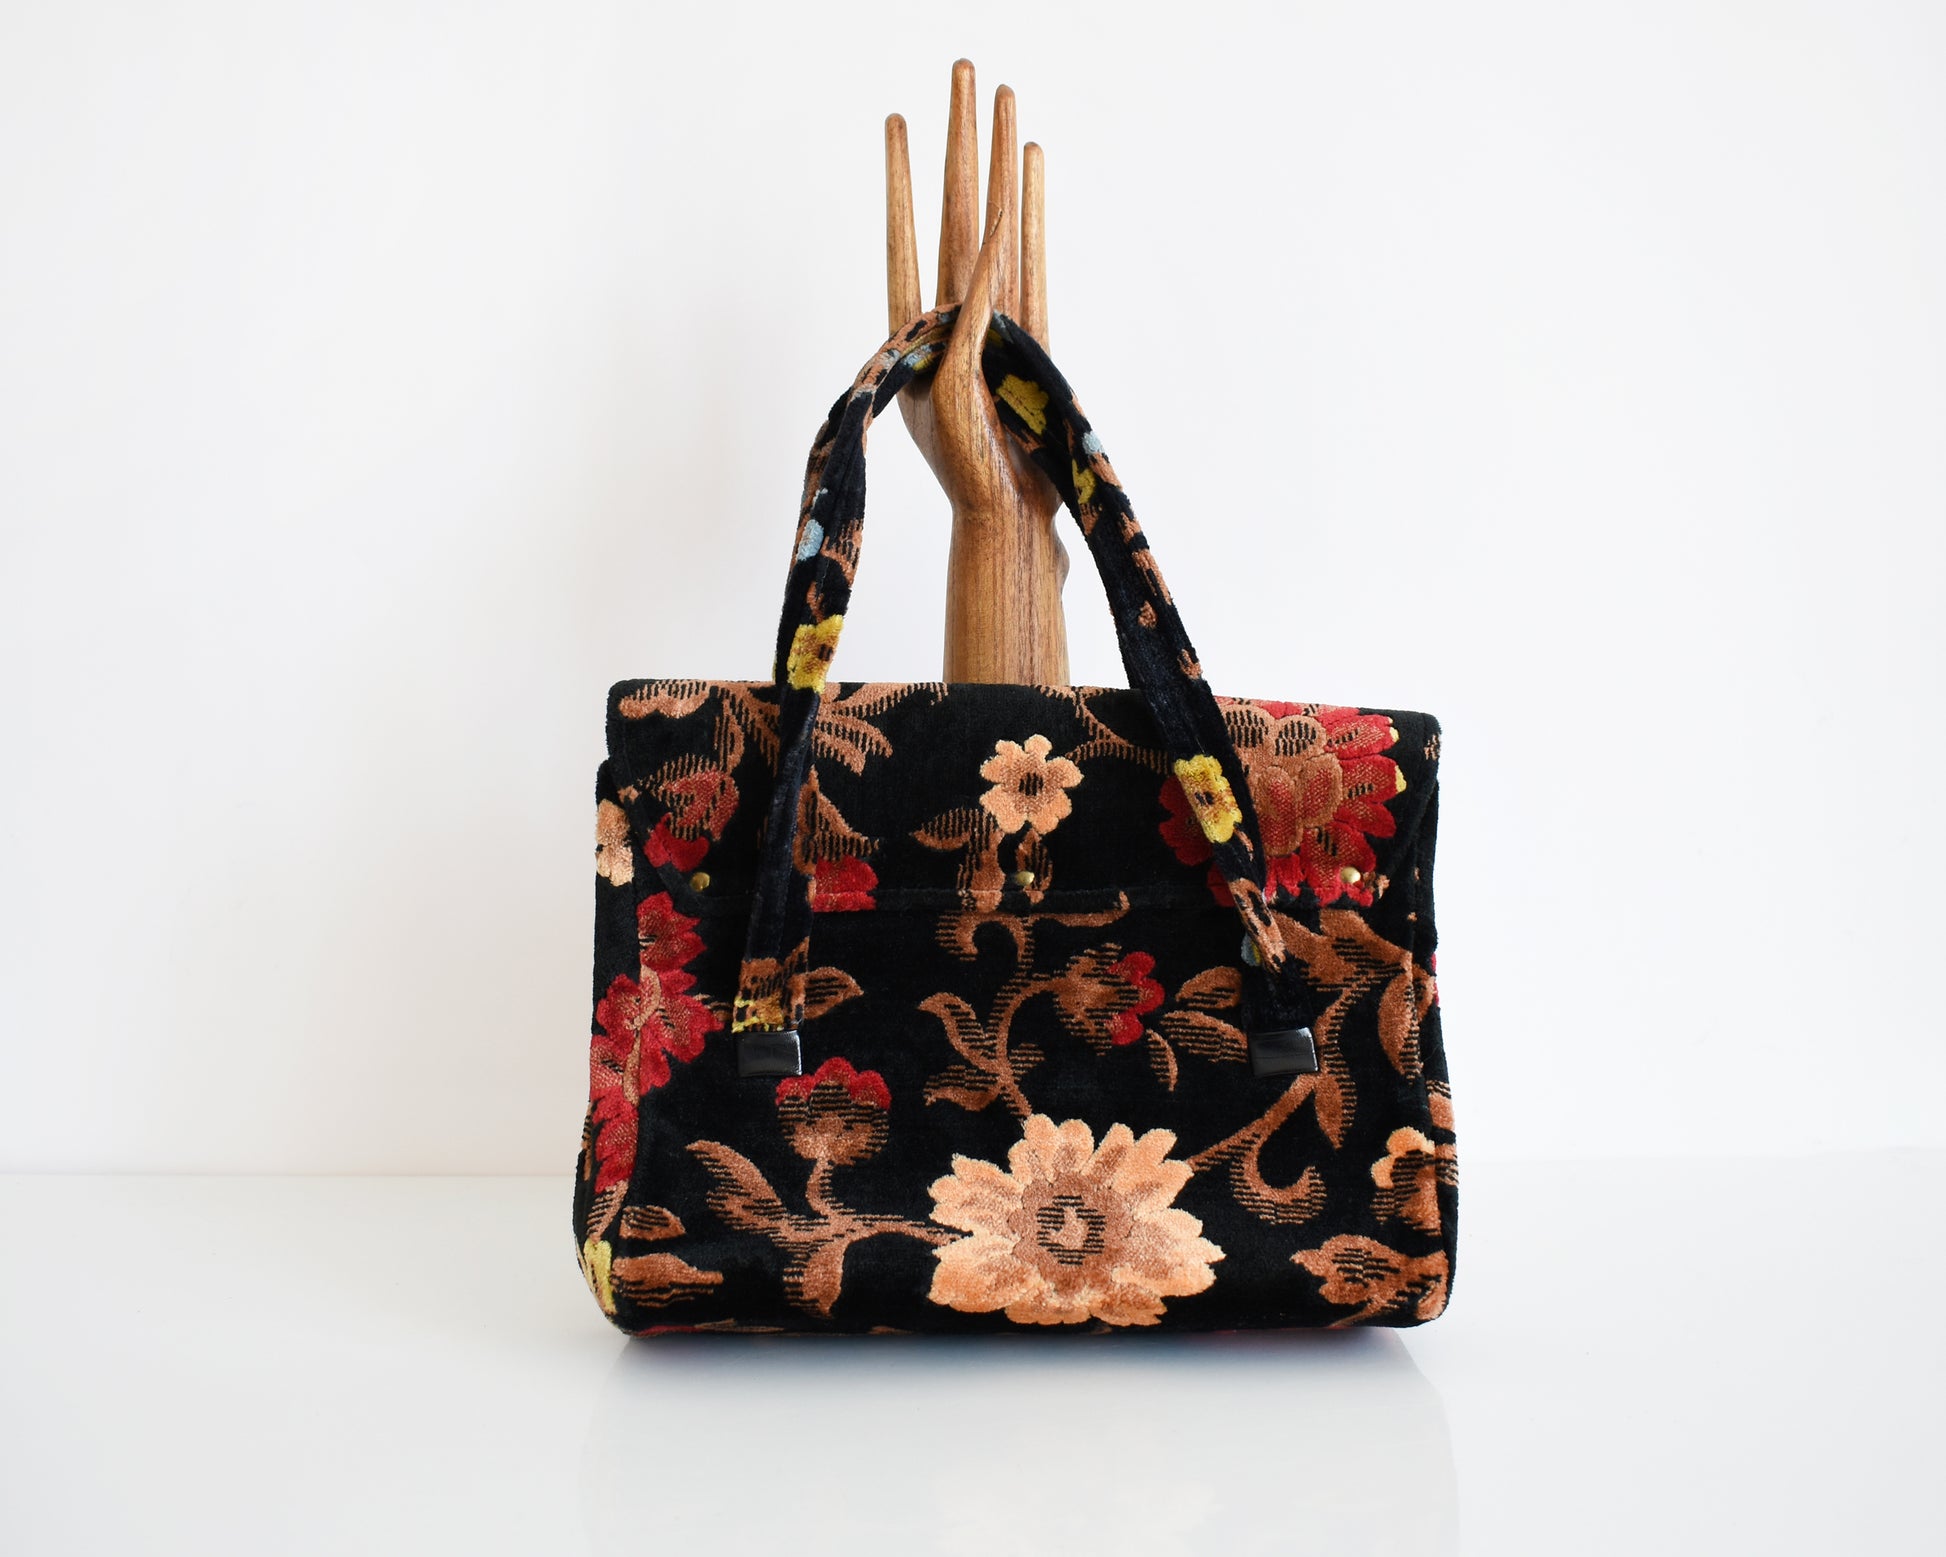 Back view of a vintage black floral velvet chenille handbag with gold tone hardware modeled with a wooden hand on a white table. The flowers are red, blue, yellow and have brown stems and leaves.